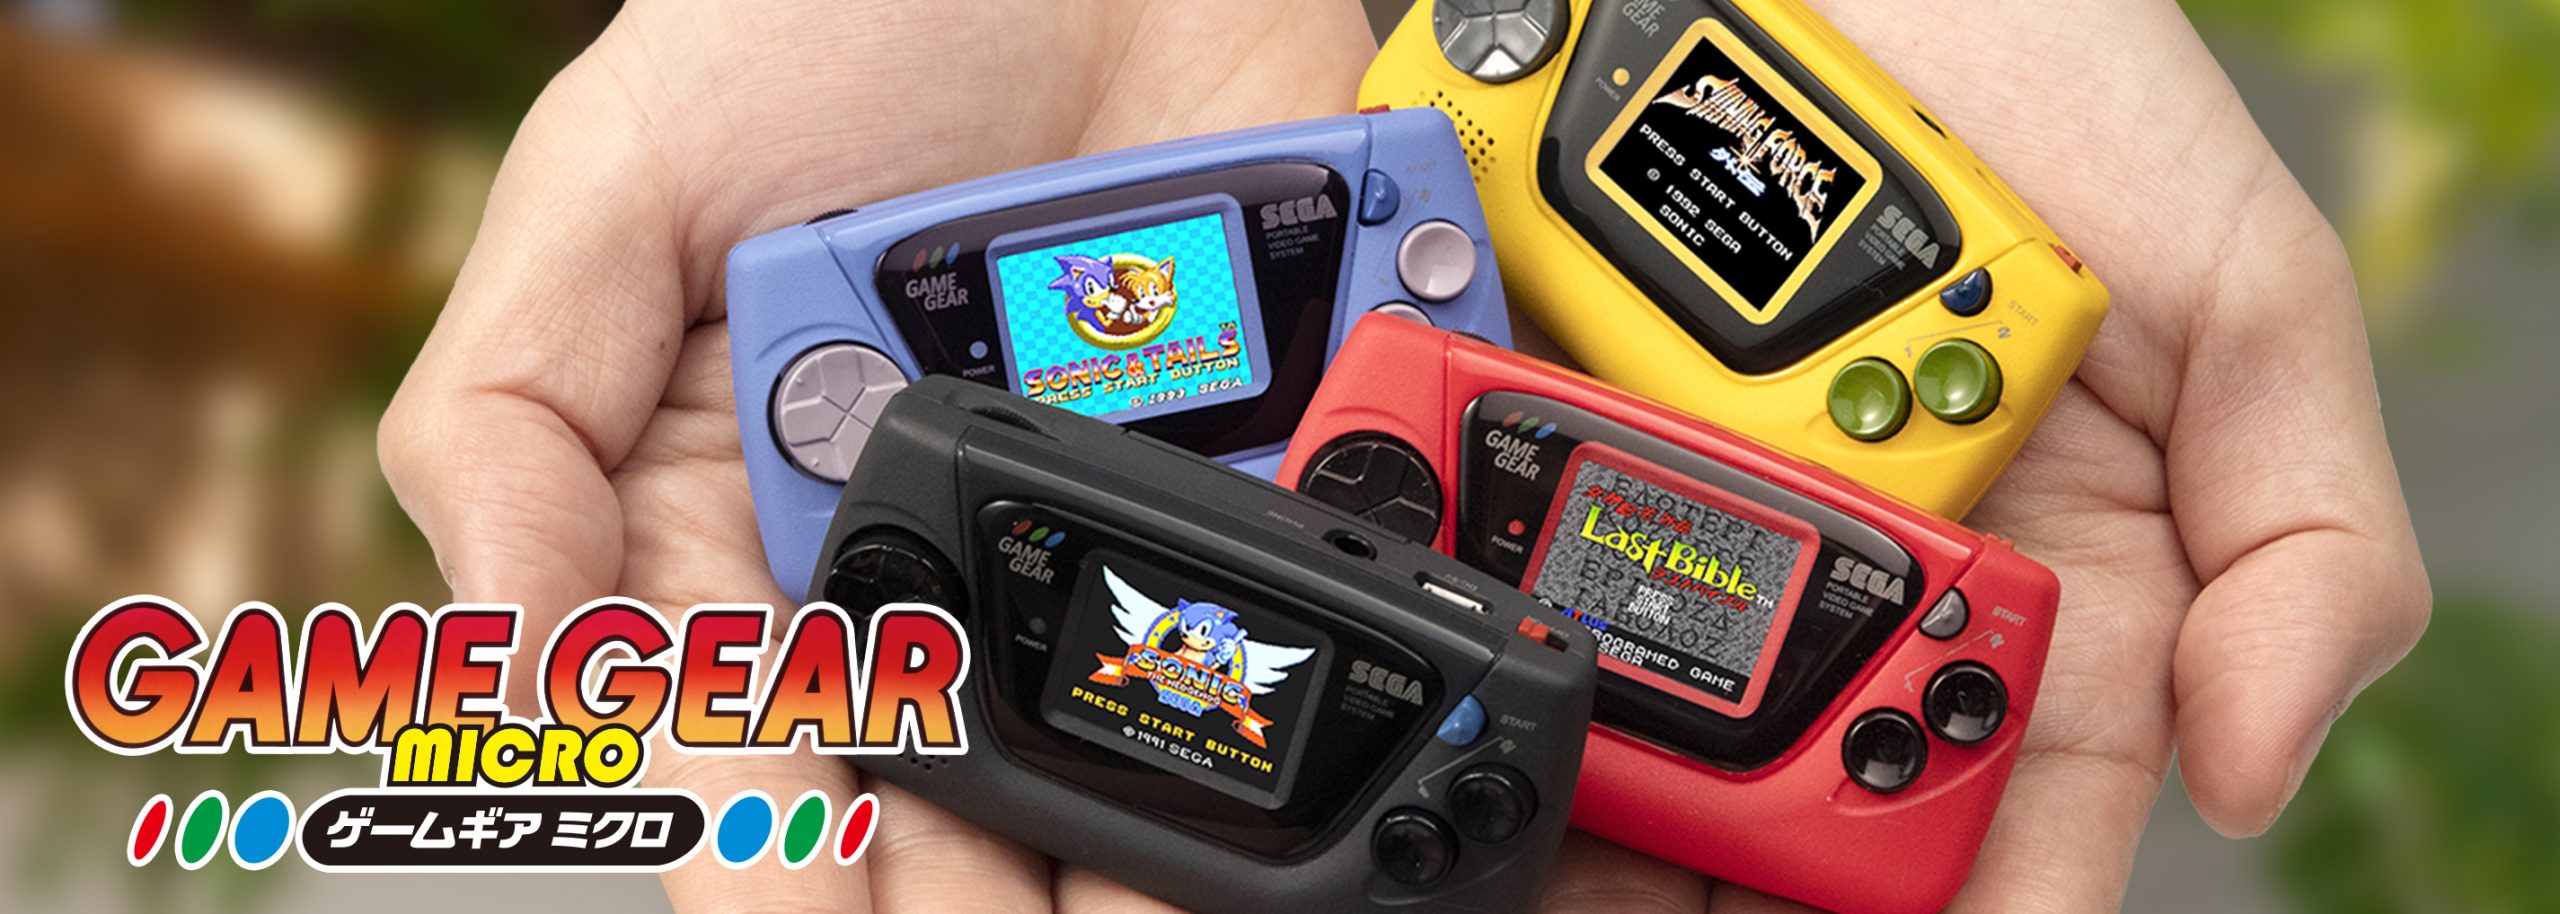 Sega reveals the stunning Game Gear Micro for its 60th anniversary